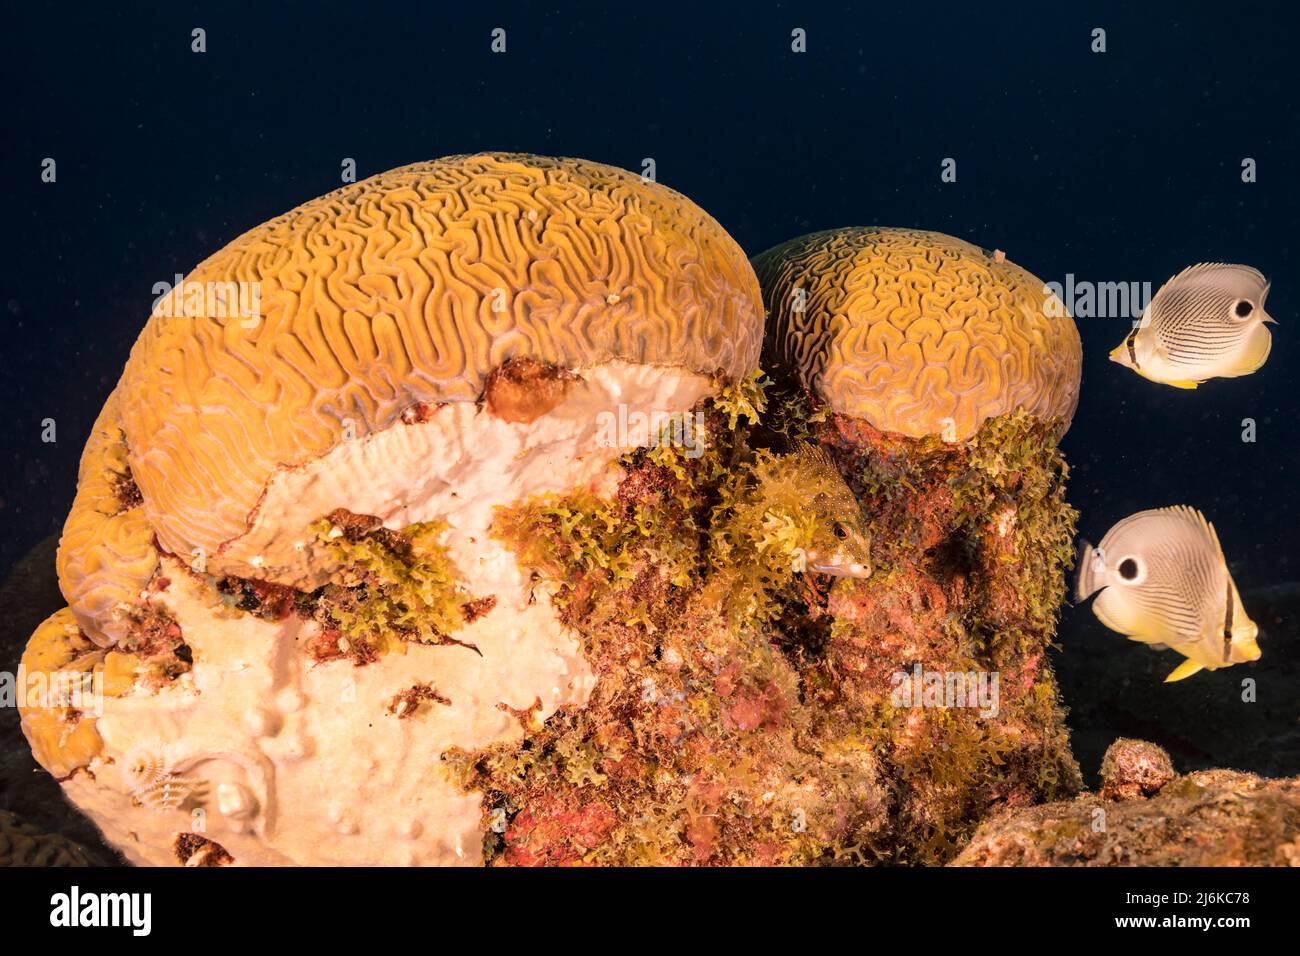 Seascape with Butterflyfish while spawning of Grooved Brain Coral in coral reef of Caribbean Sea, Curacao Stock Photo